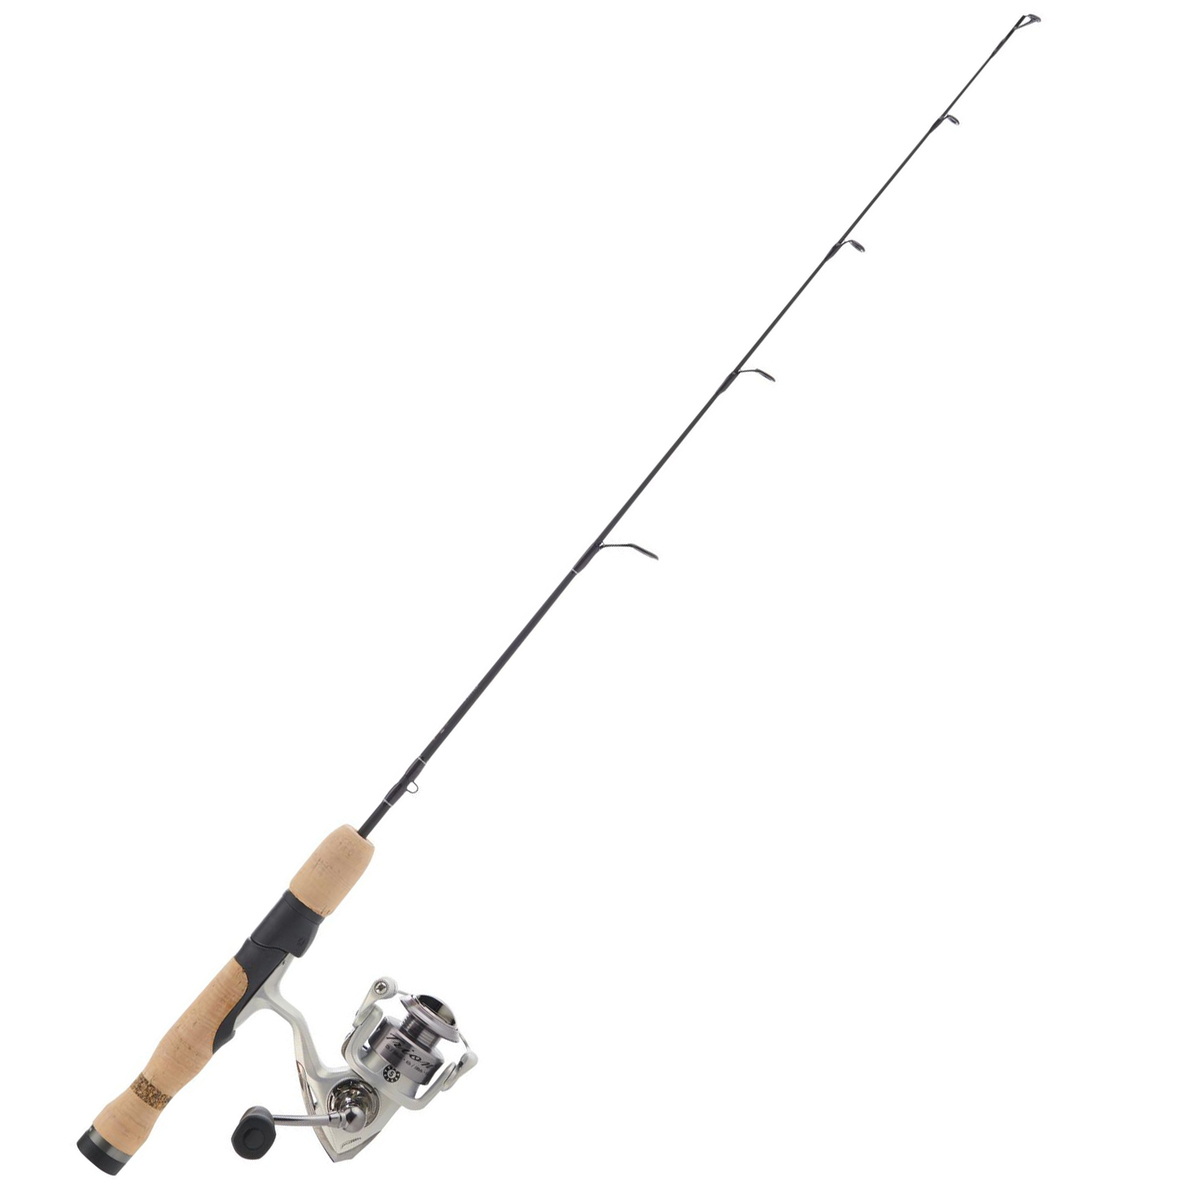 Fenwick HMG Inshore Spinning Fishing Rod, Pick Size & Power from 5 Options